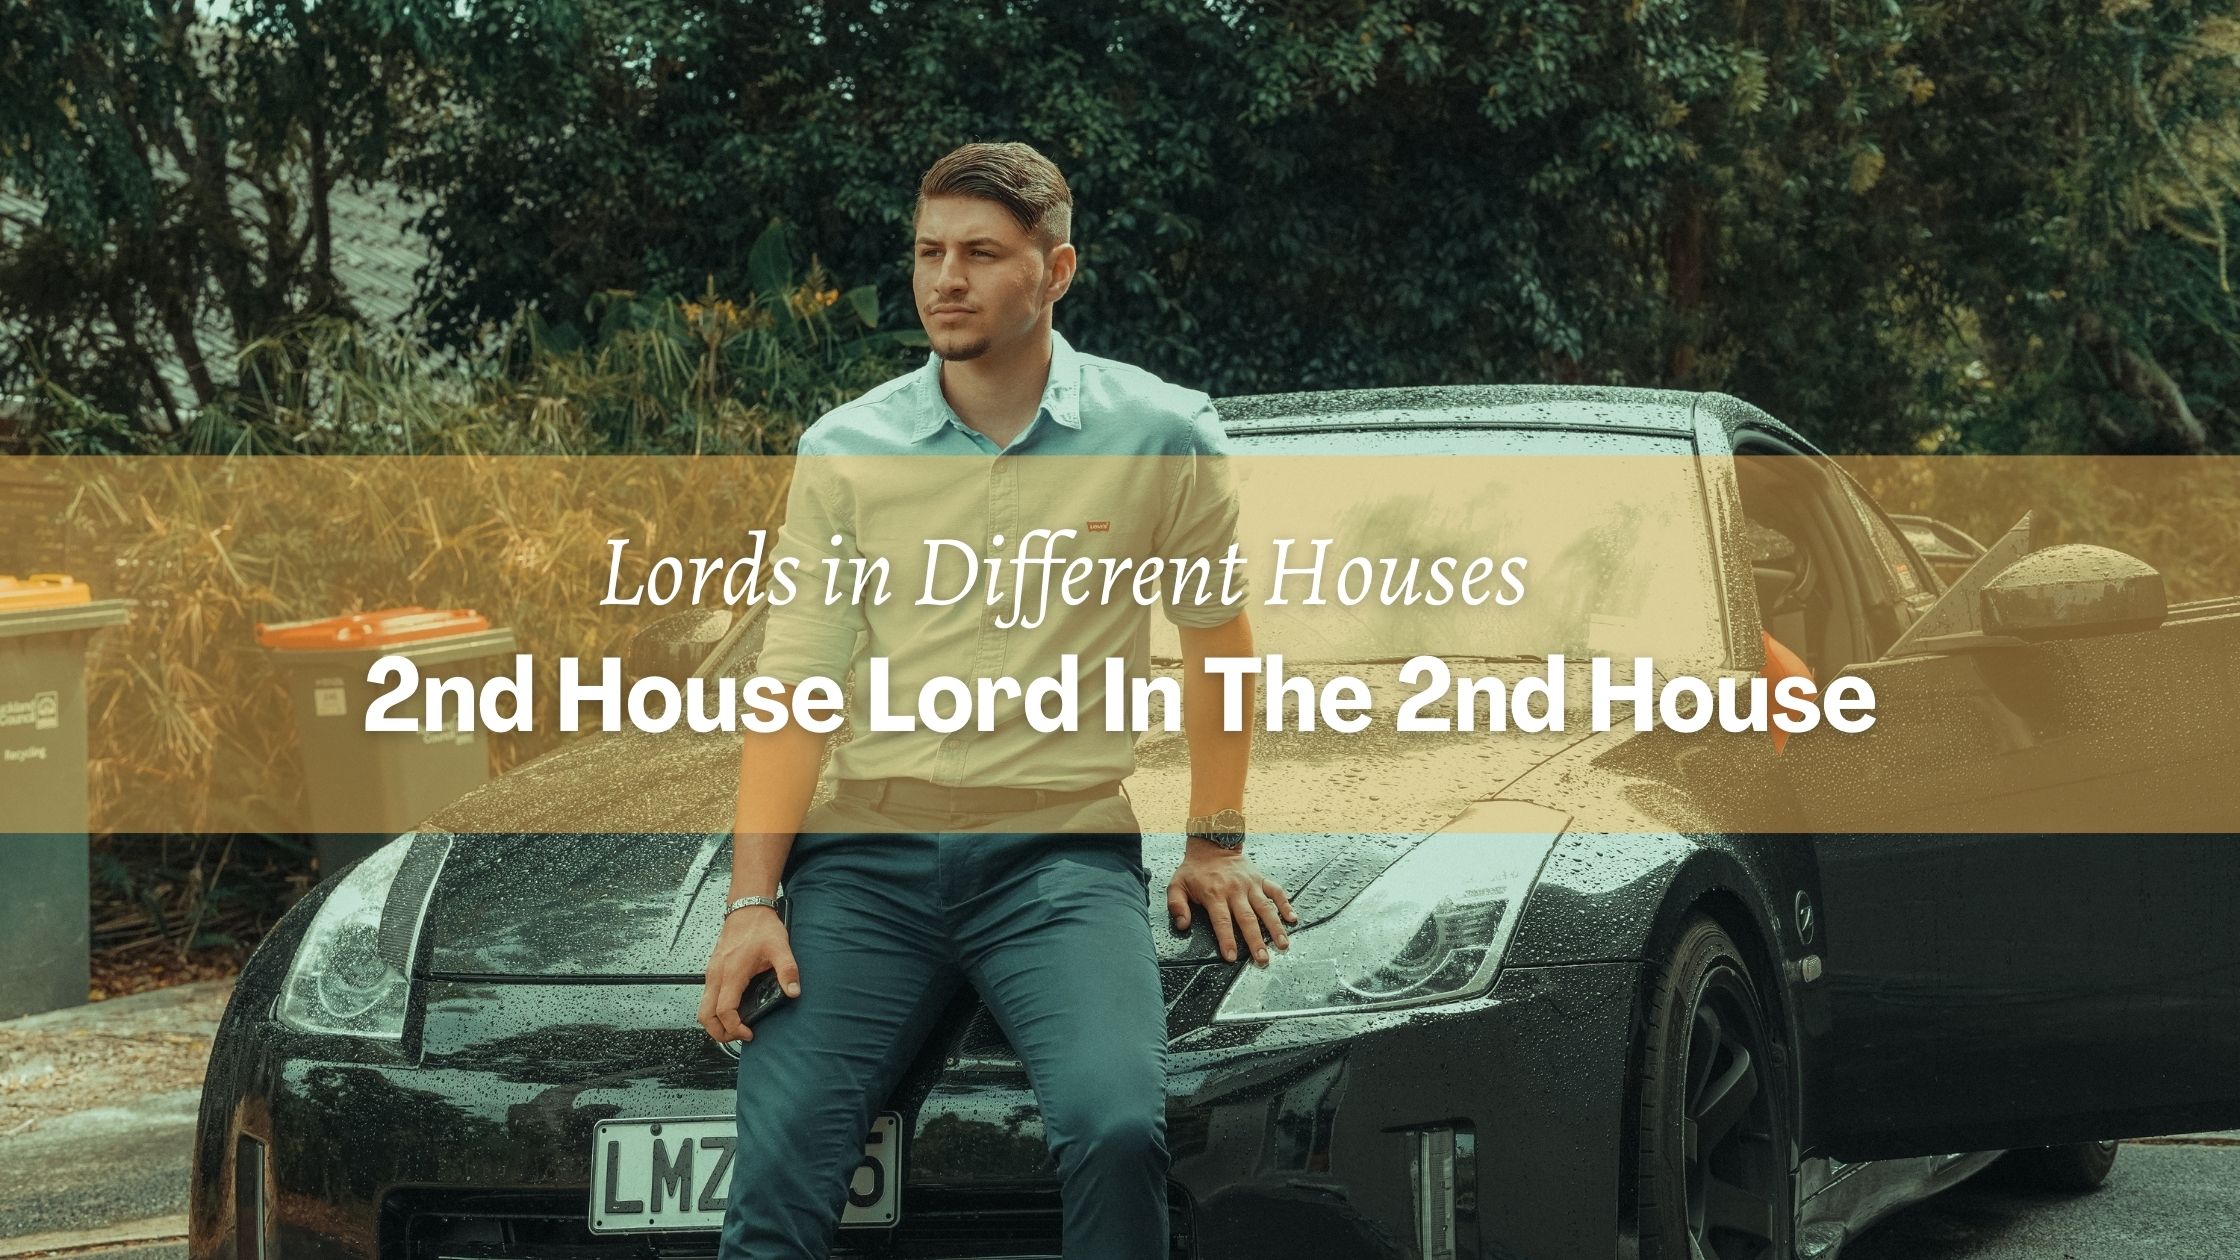 2nd house lord in the 2nd house